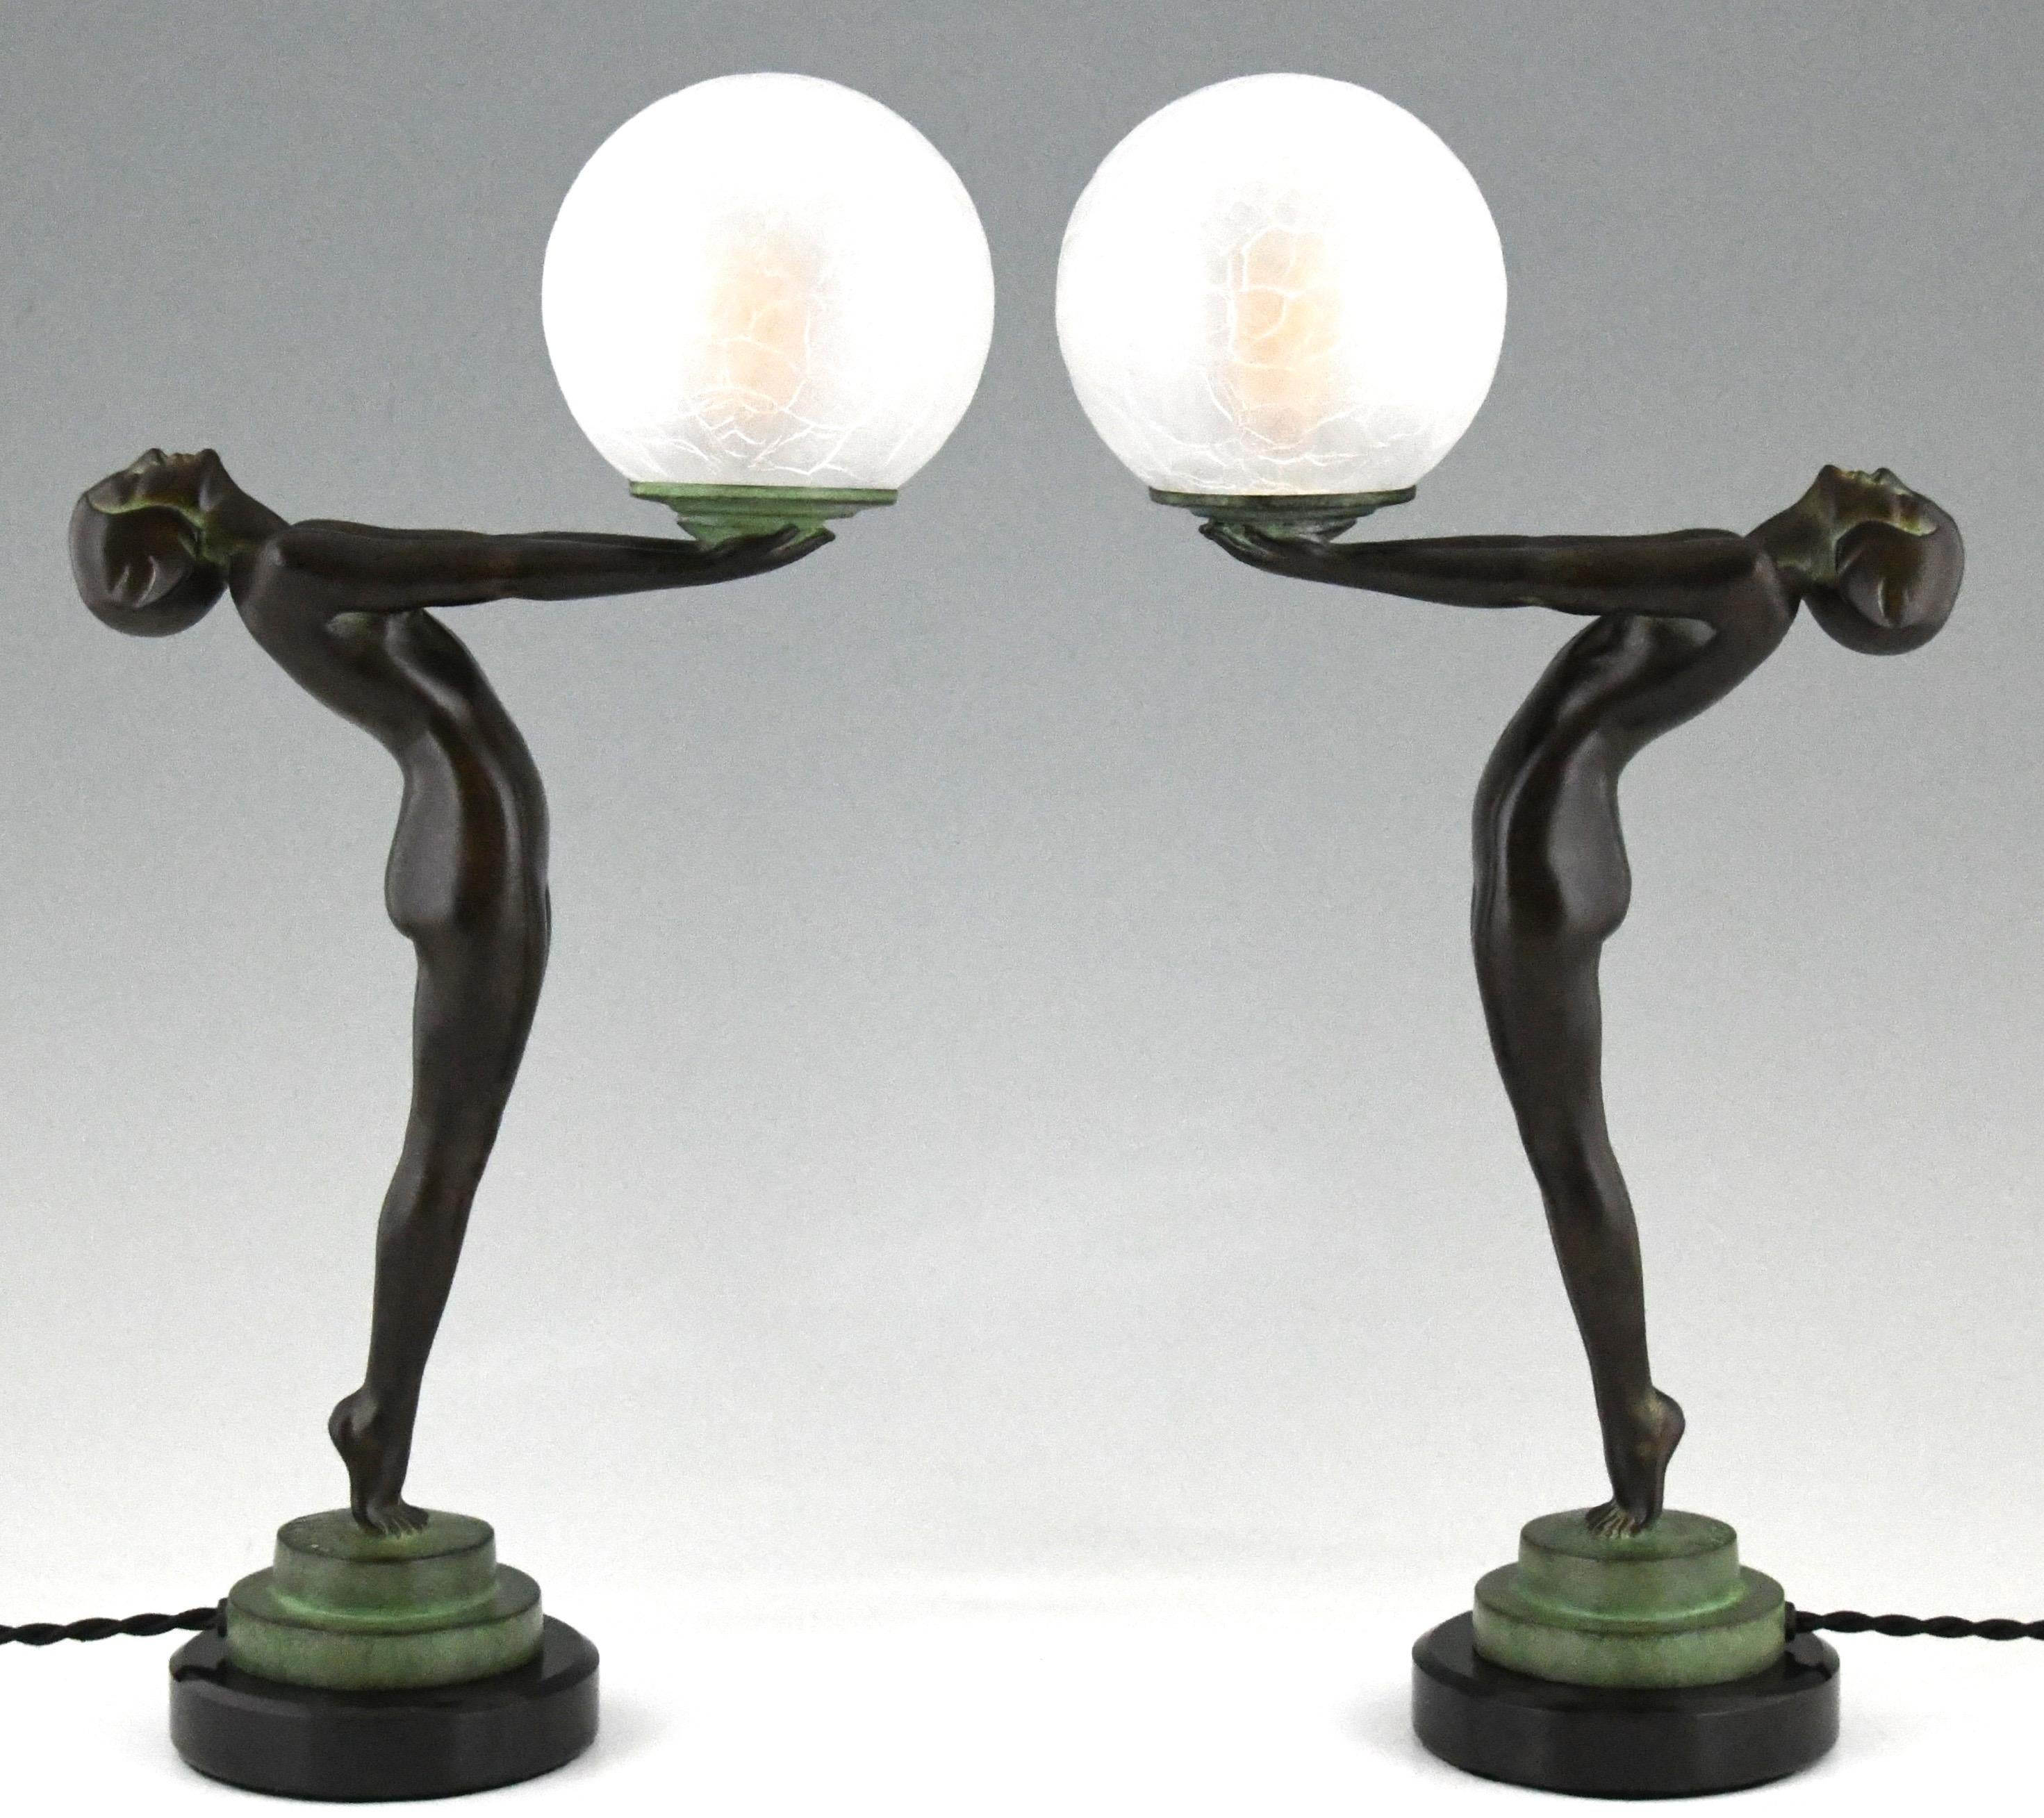 Pair of Art Deco style figural table lamps of a standing nude lady holding a glass globe.
This model is called Lueur lumineuse and is the smaller version of the iconic Clarté lamp by Max Le Verrier.
The lamps are signed and have the Le Verrier